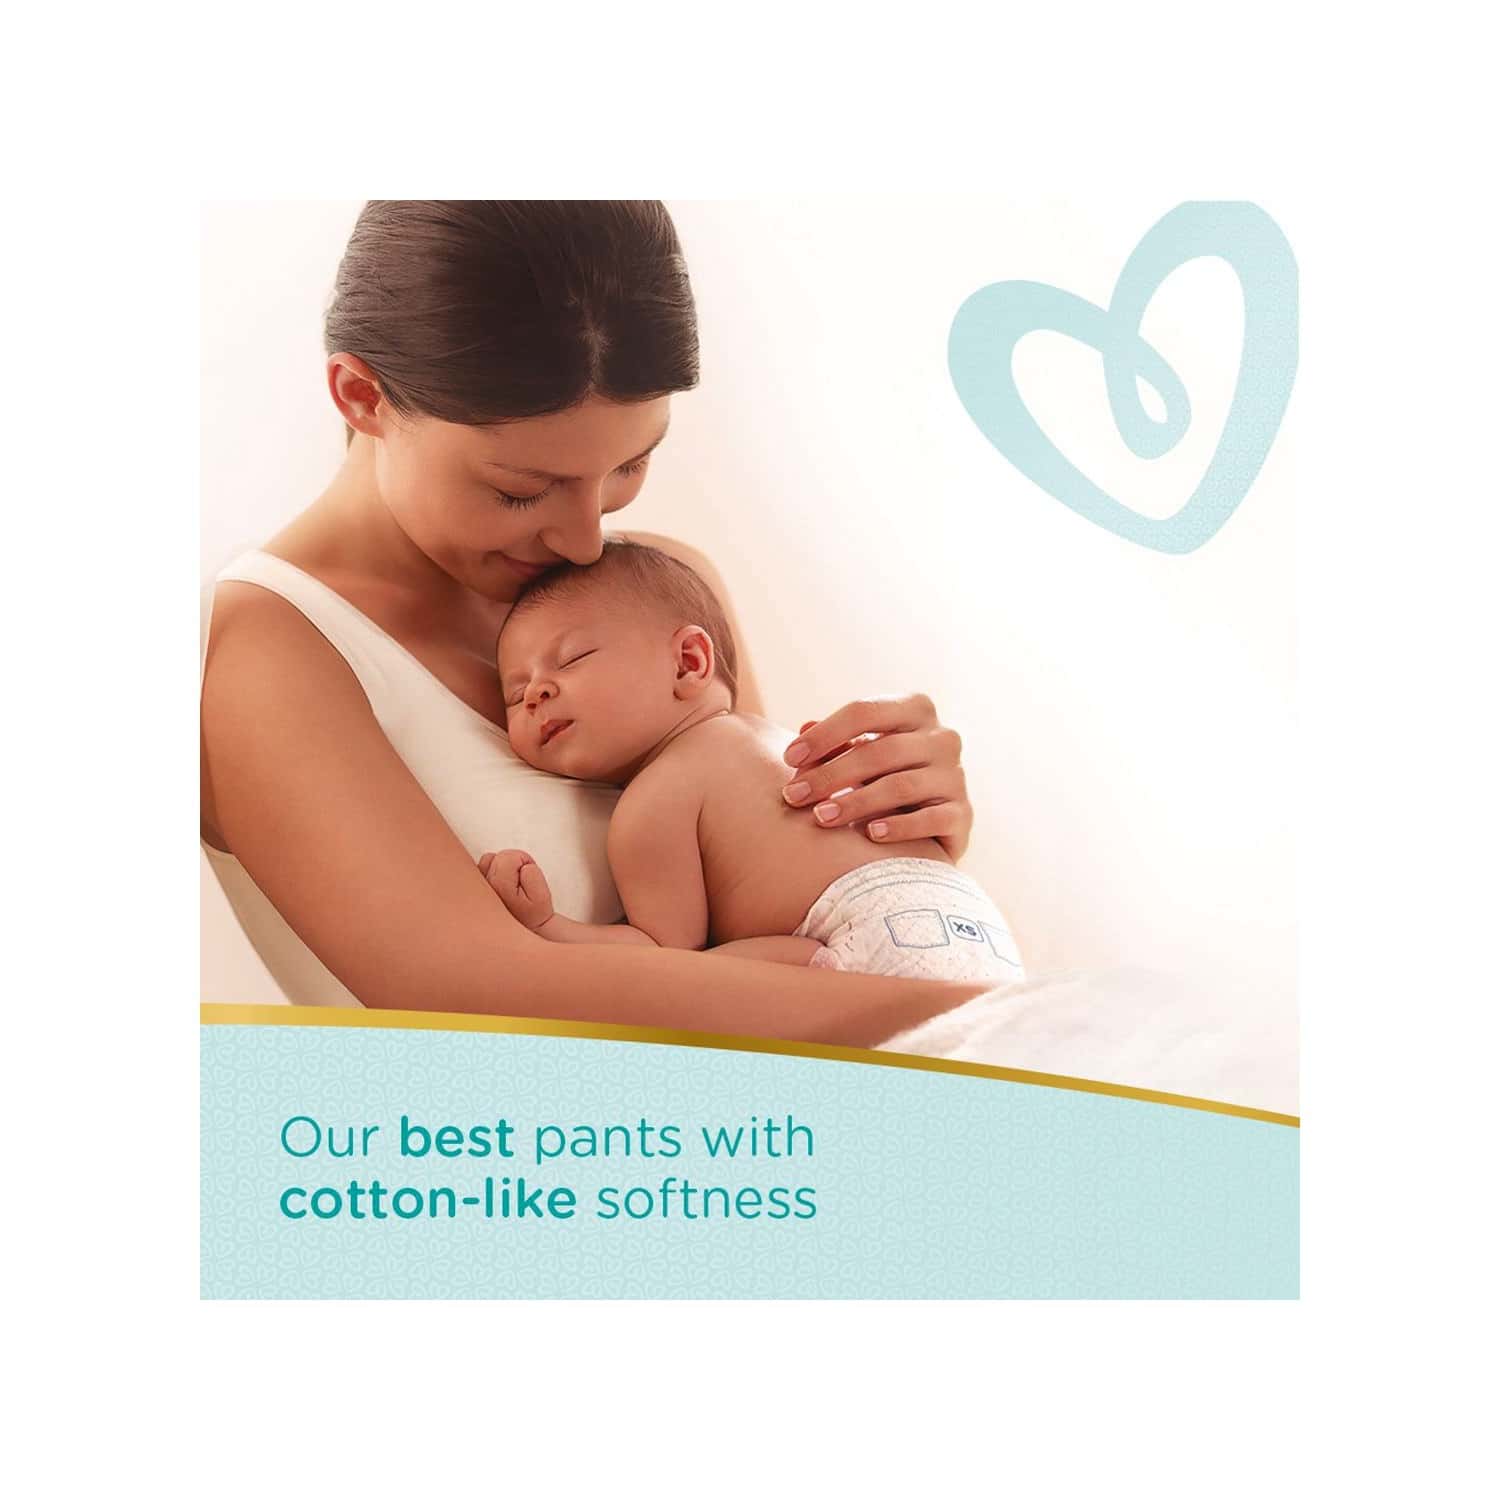 Pampers Small Baby Diaper - Get Best Price from Manufacturers & Suppliers  in India